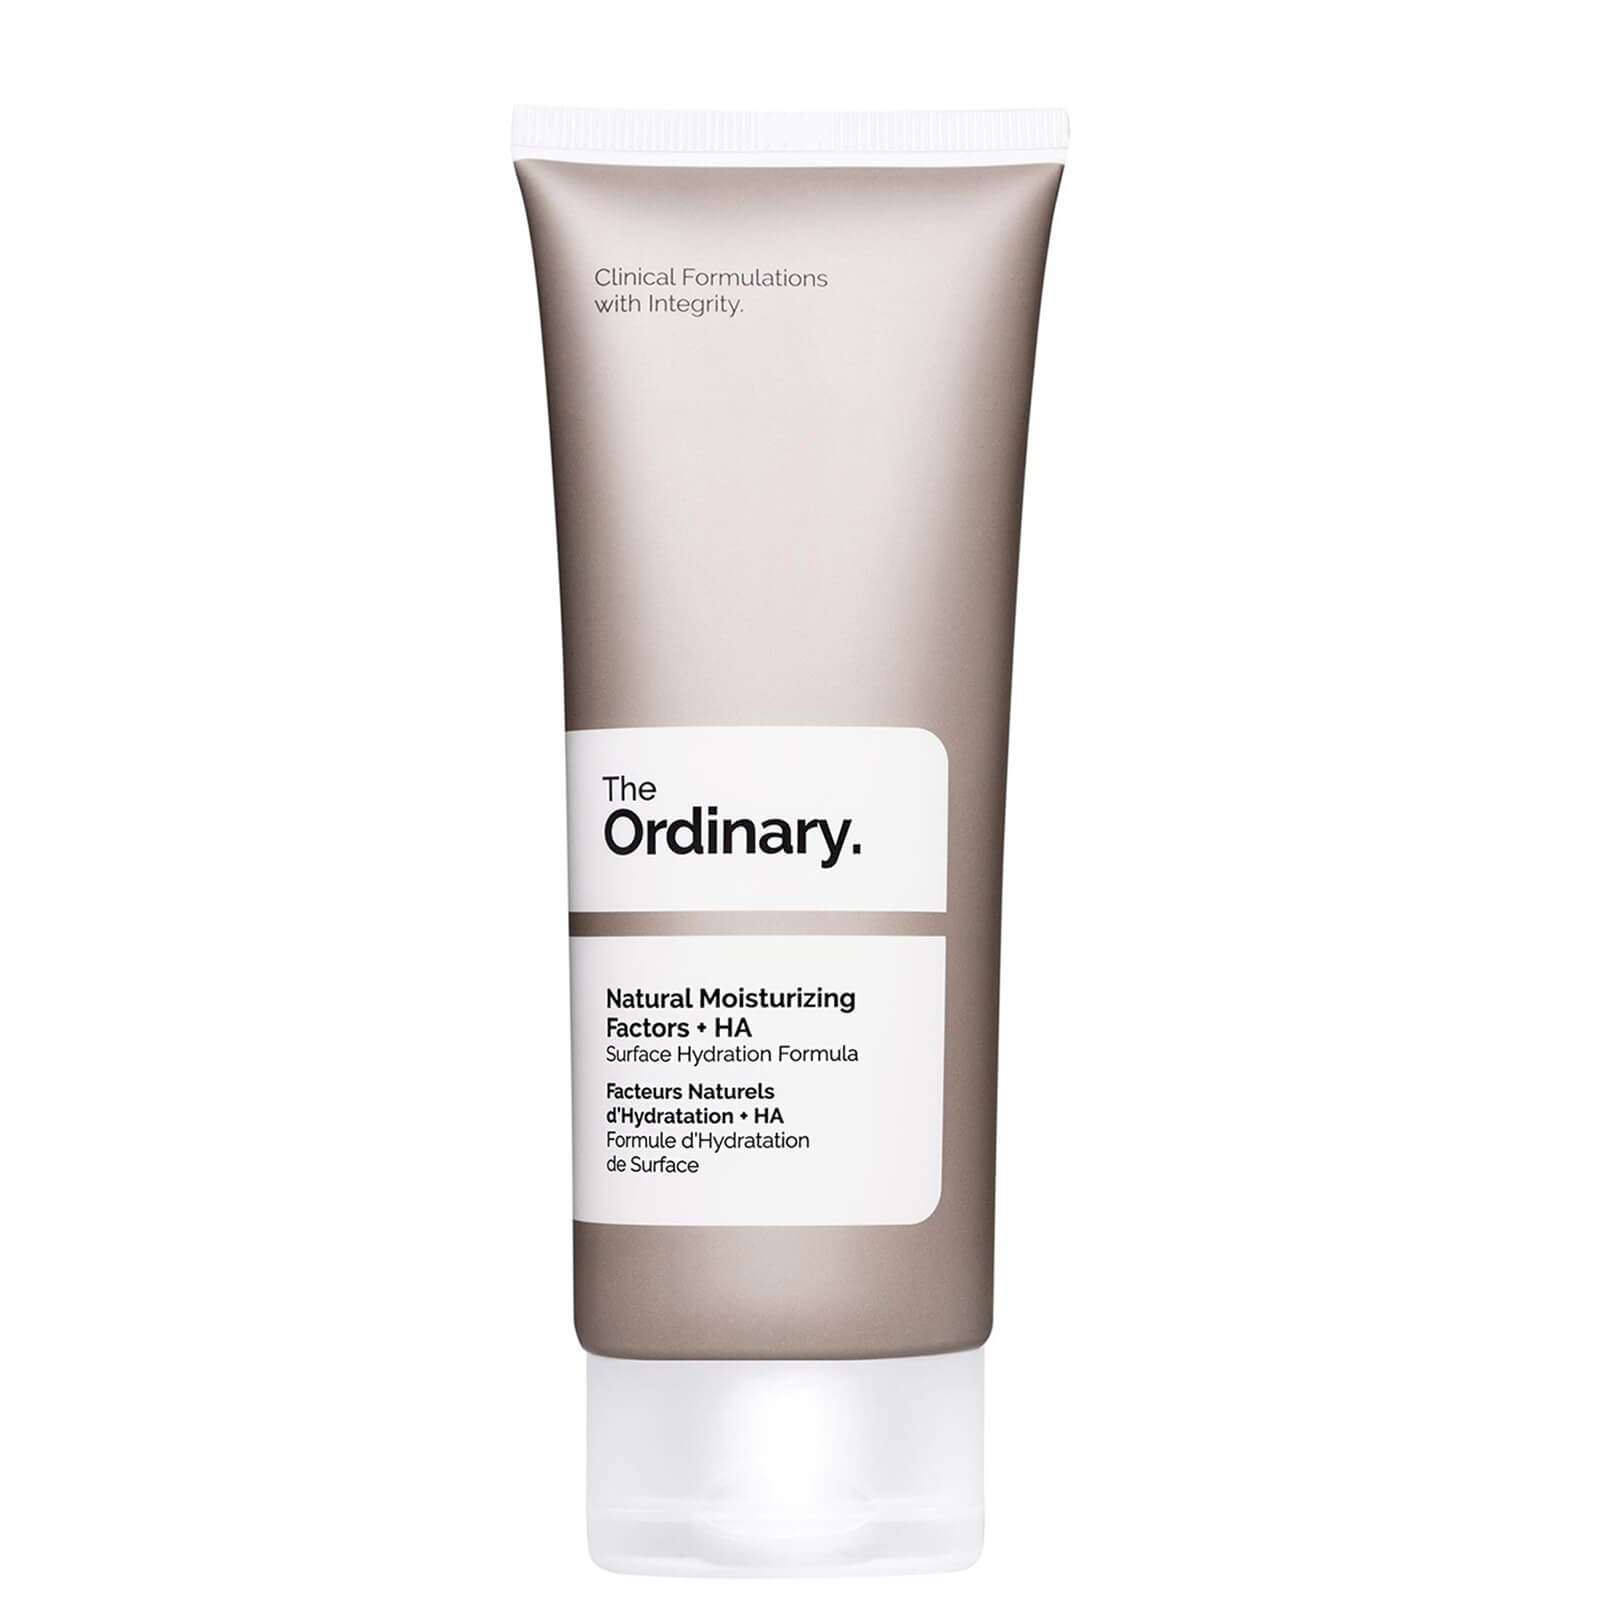 The ordinary natural. - Squalane Cleanser 50ml. The ordinary High-adherence Silicone primer. Сыворотка the ordinary Azelaic acid Suspension 10% с азелаиновой кислотой. The ordinary Squalane Cleanser.